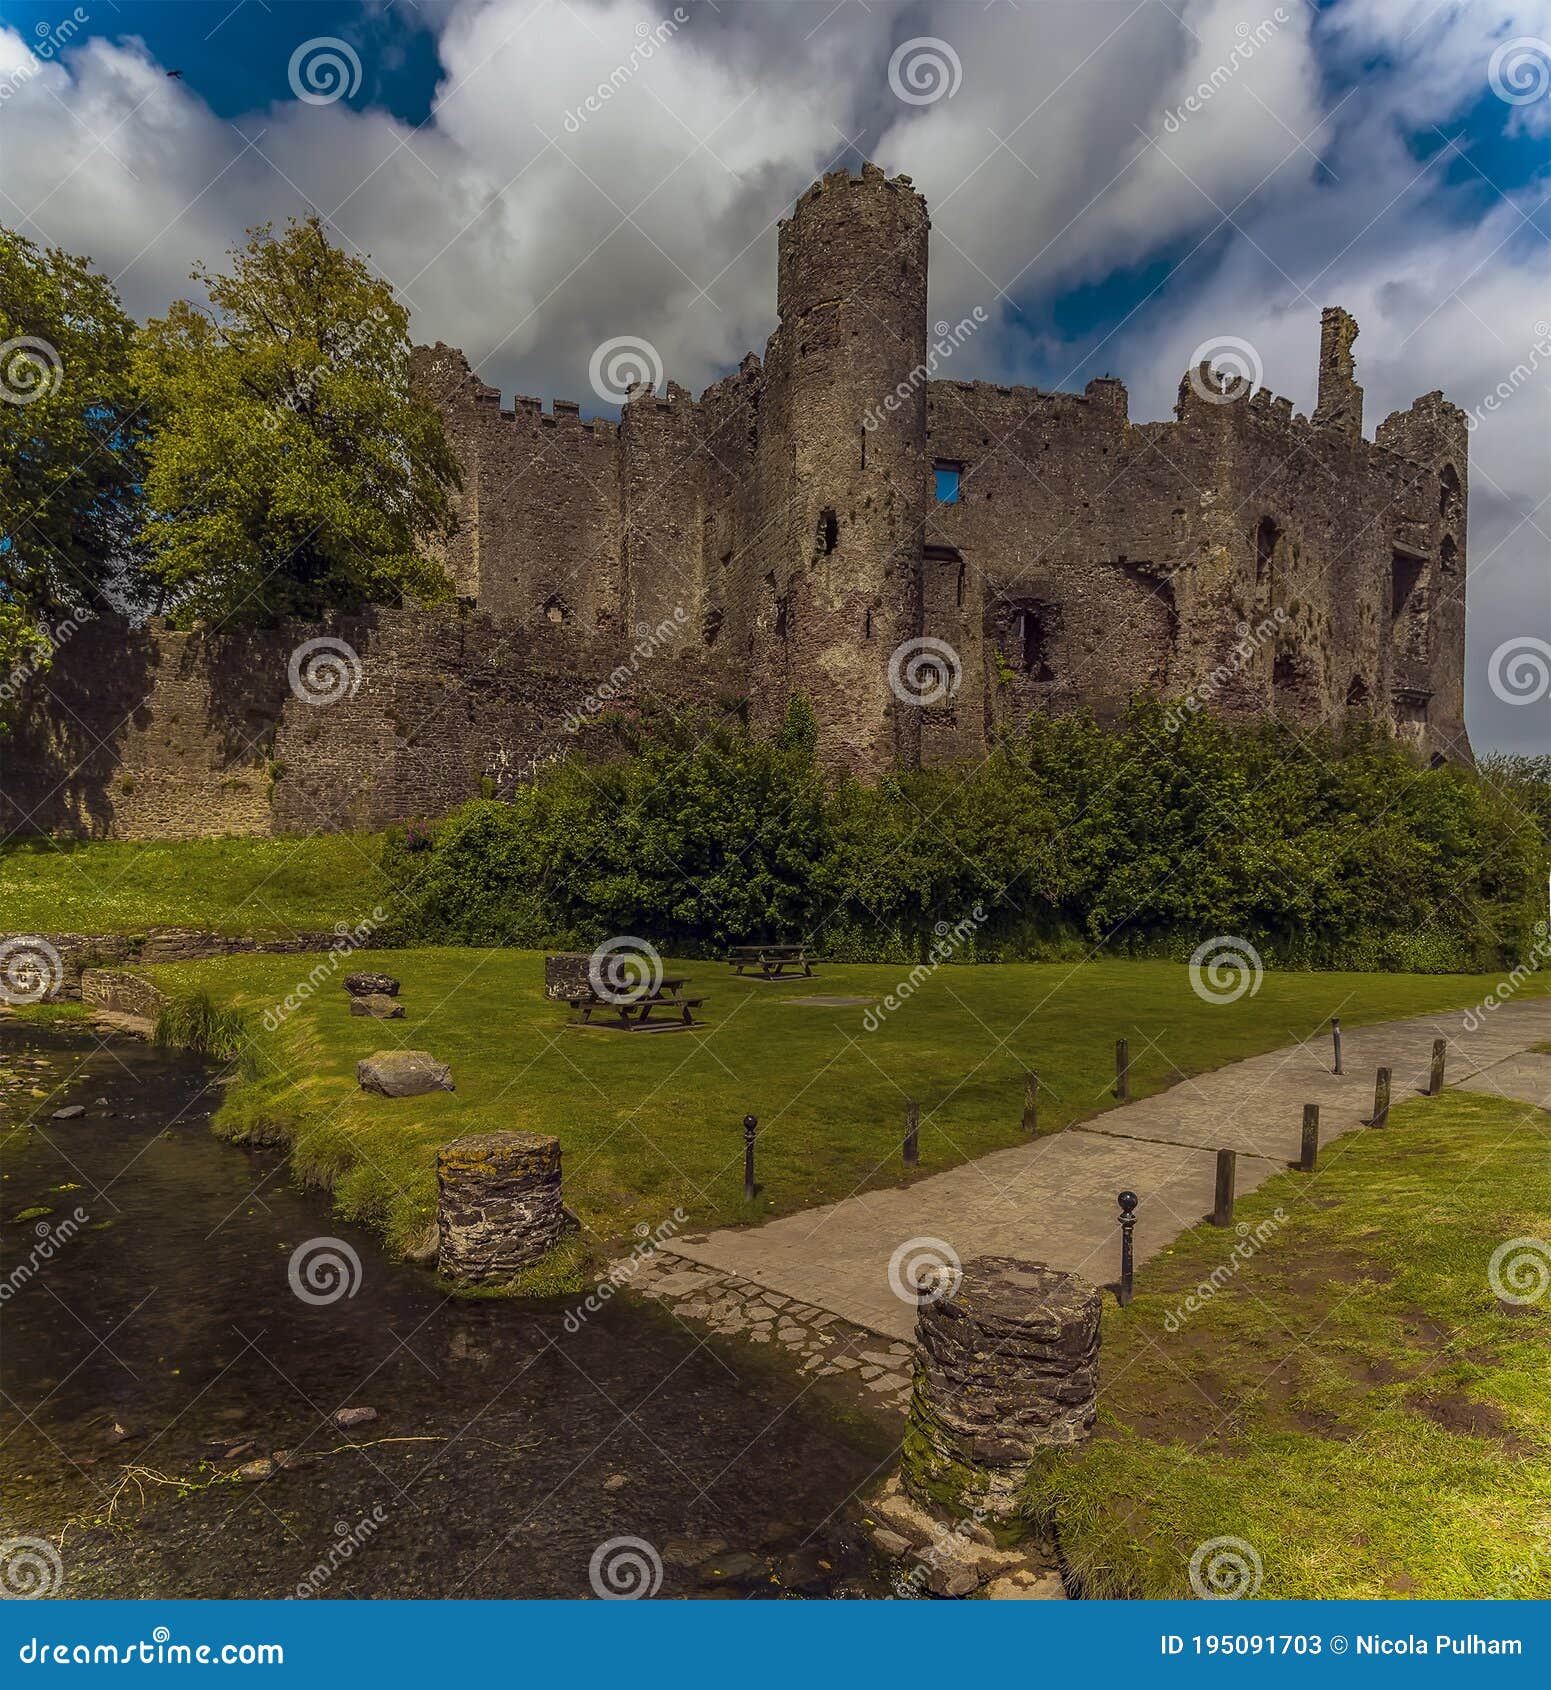 a view across the river coran towards the castle at laugharne, wales